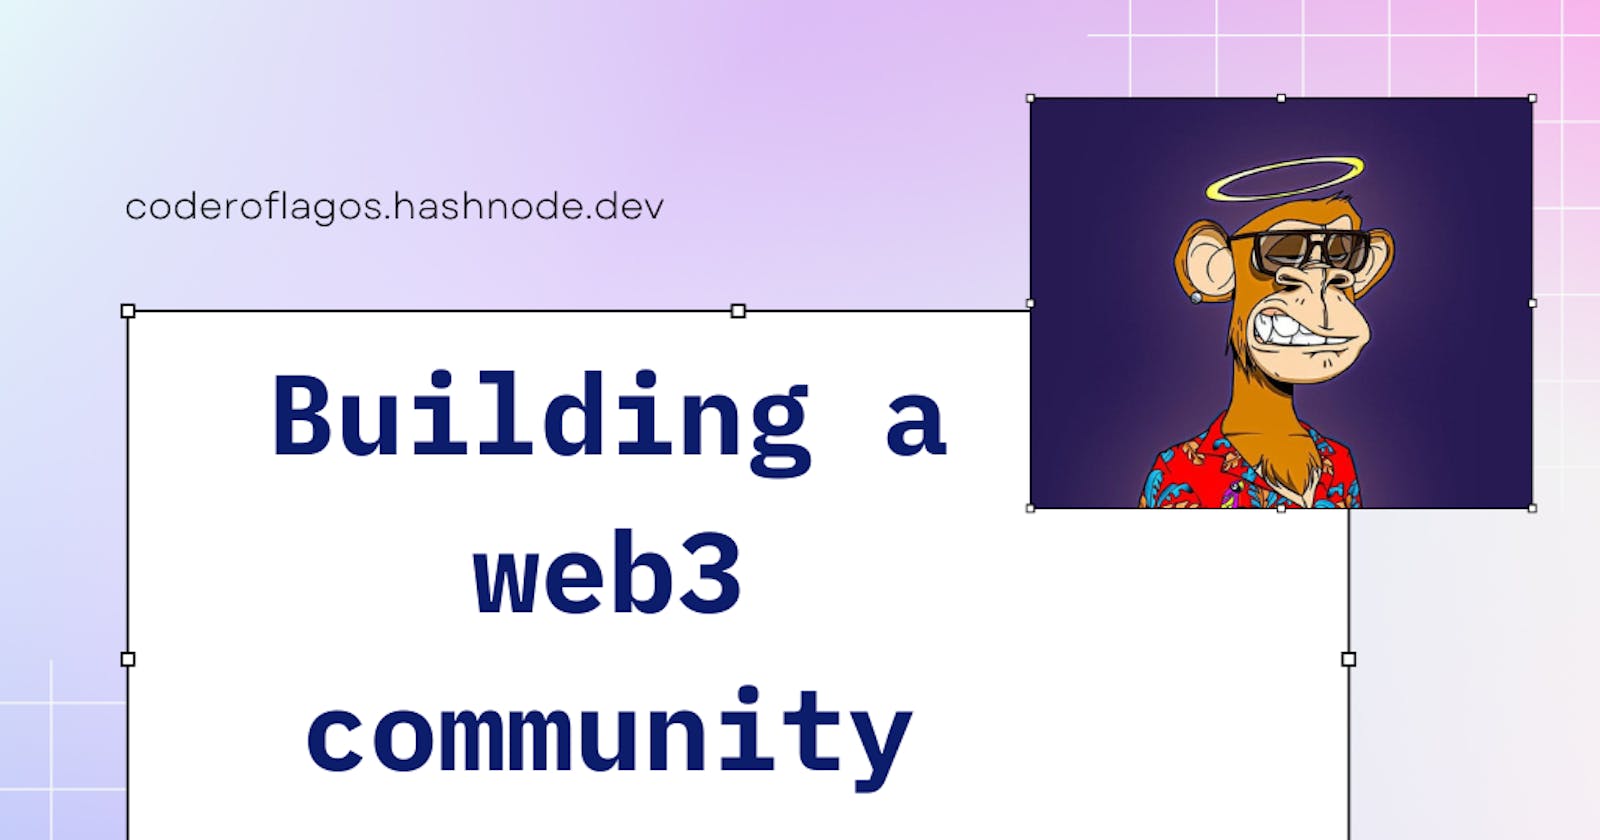 Building a web3 community with NFTs